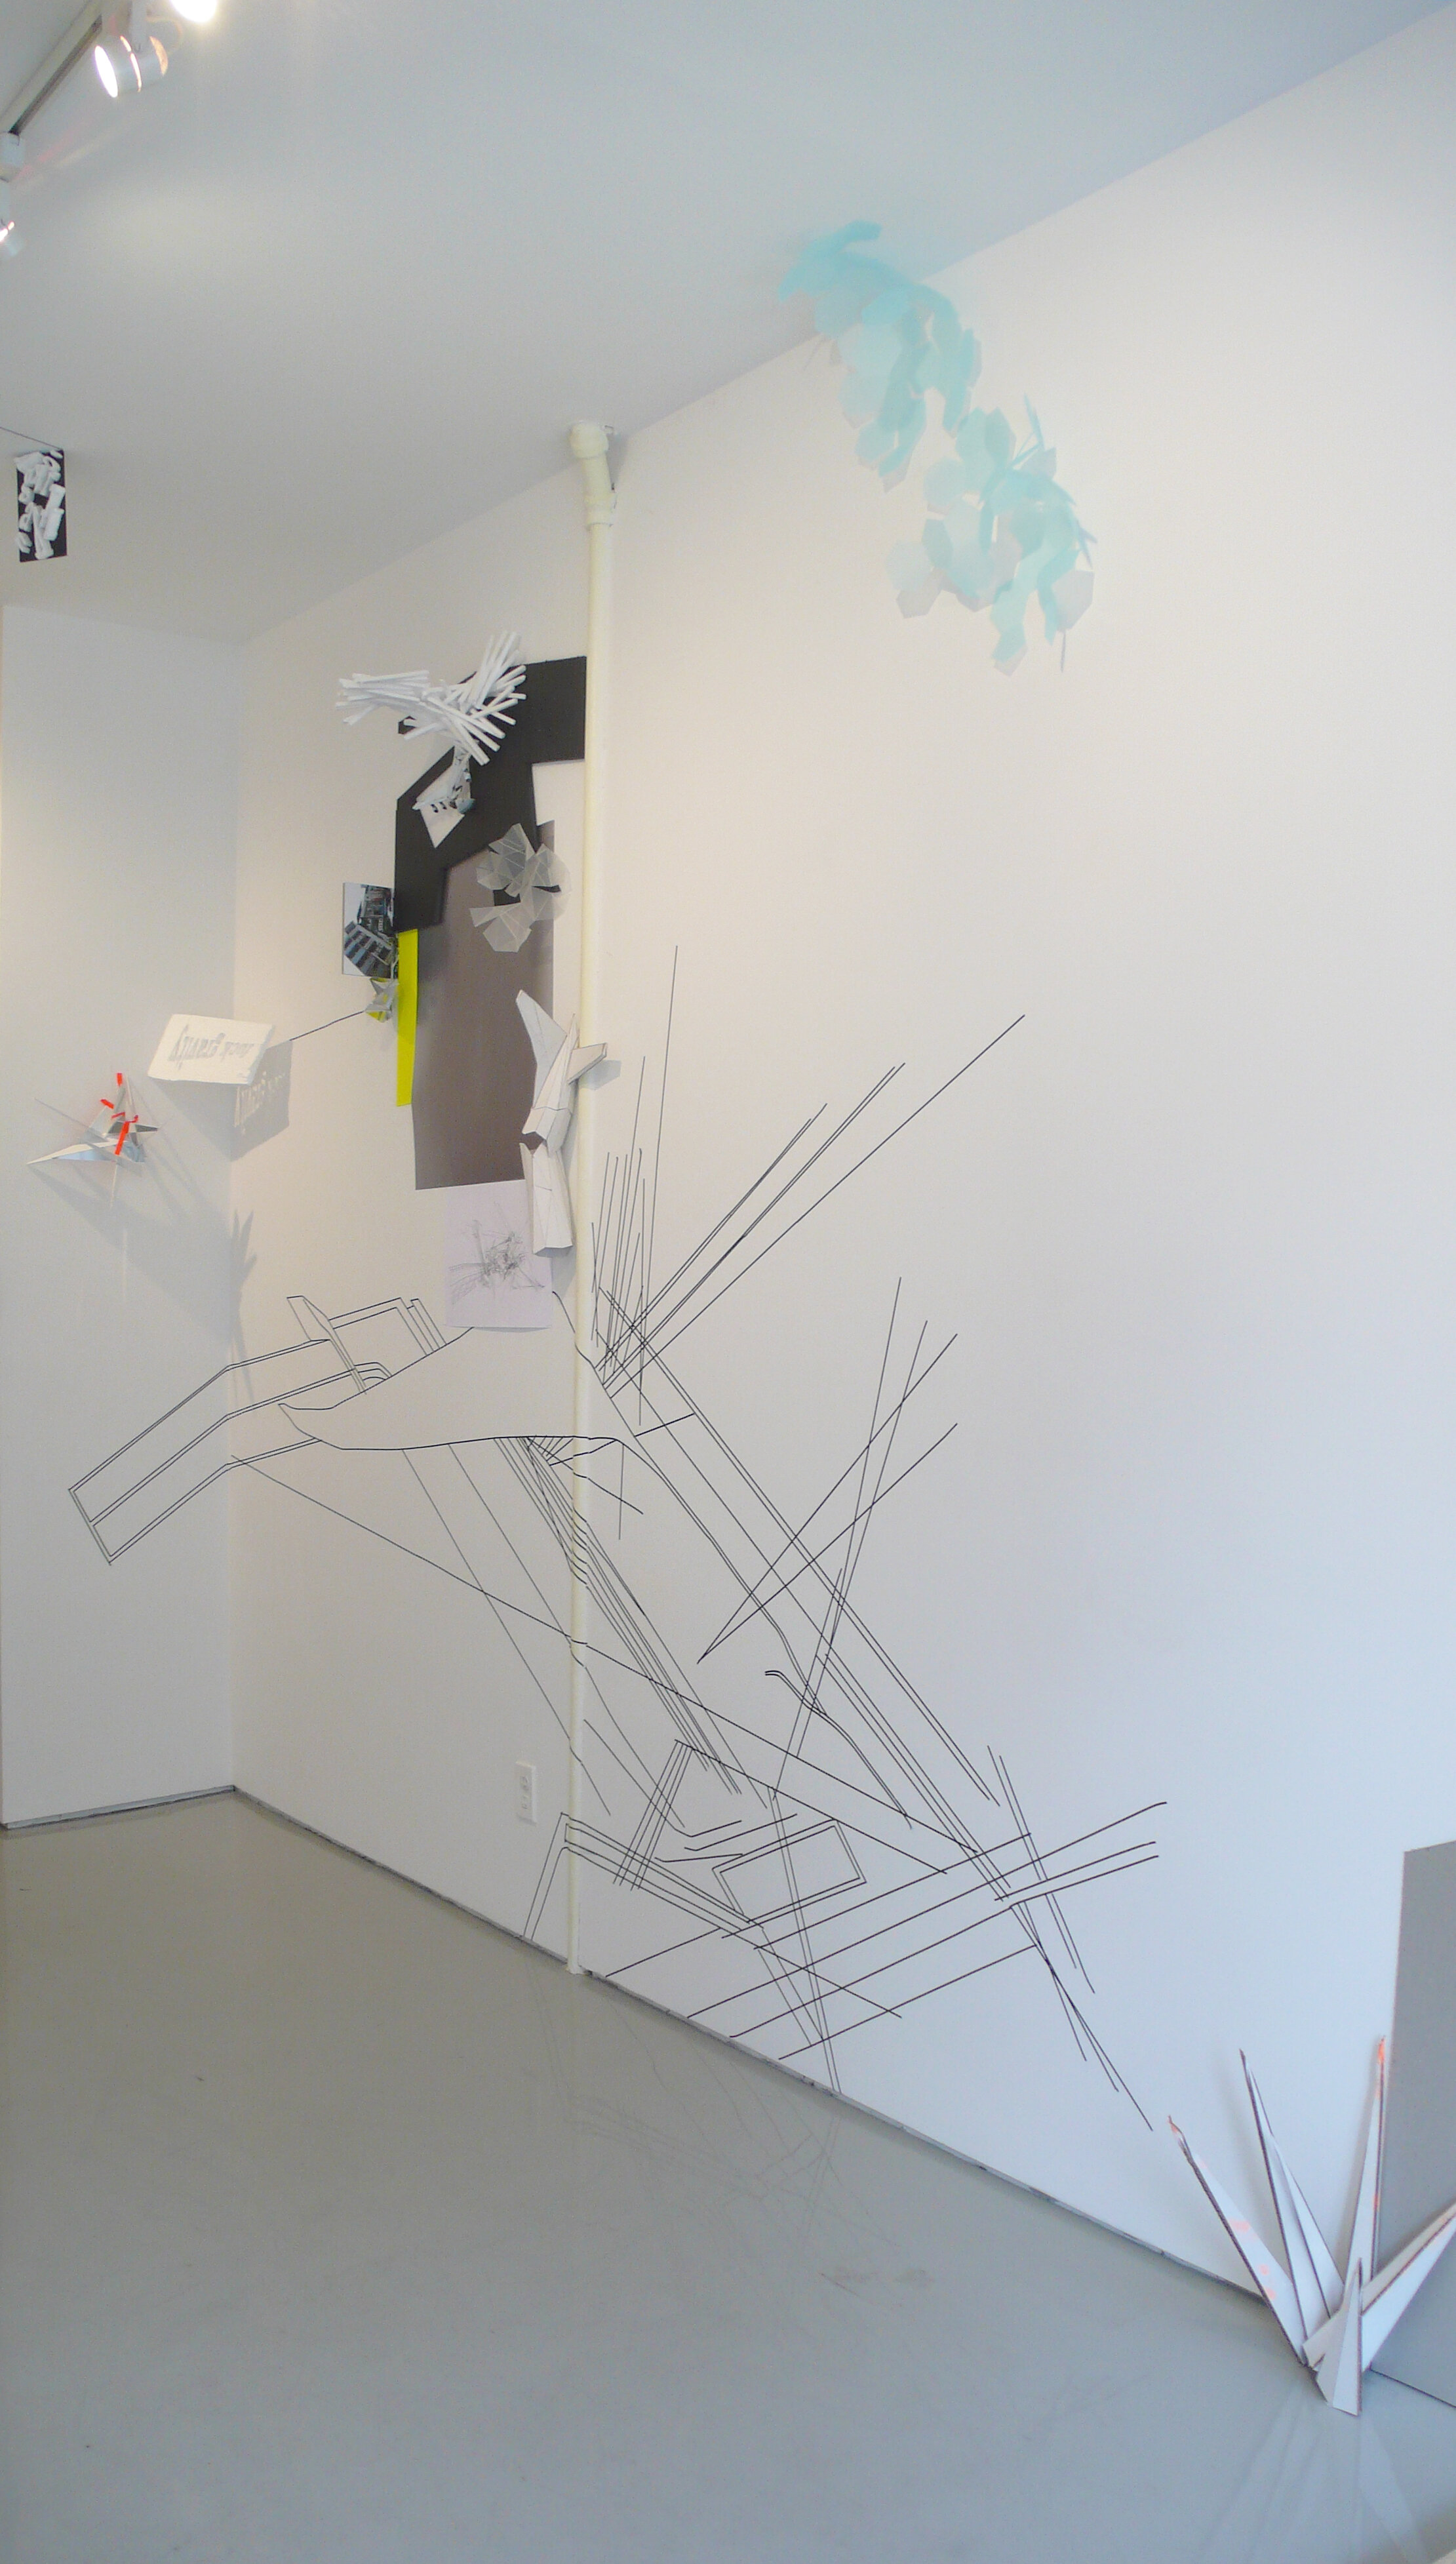 Installation image from the 2008 Kreissl &amp; Kerber exhibition, First Thing Tomorrow Morning, at Cindy Rucker Gallery, Number 35